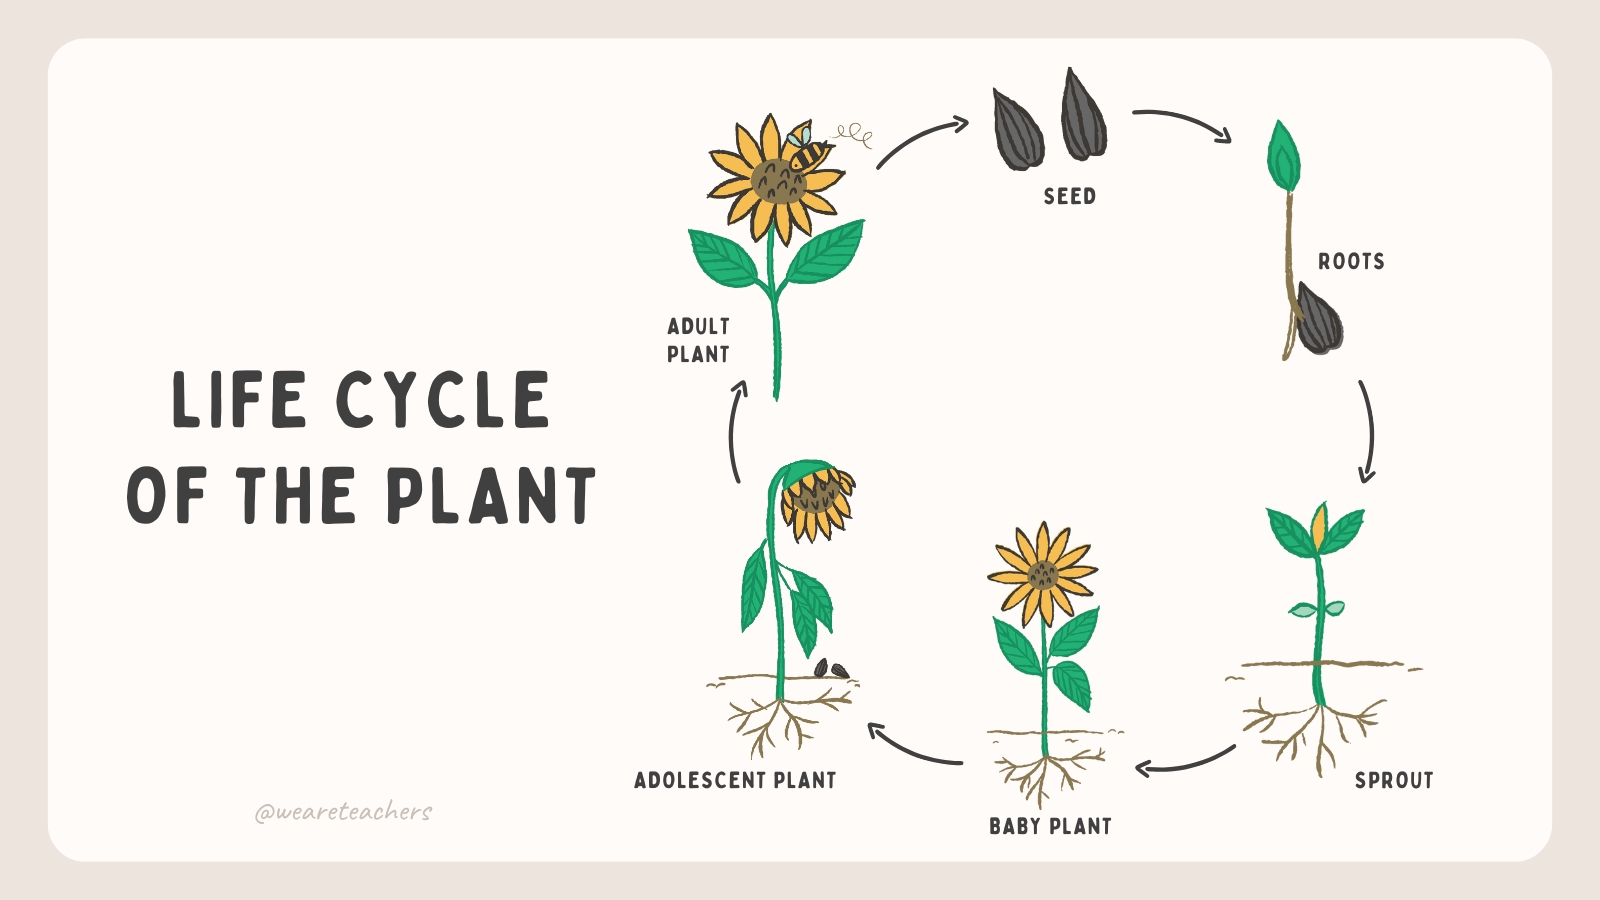 Diagram featuring the life cycle of a plant.